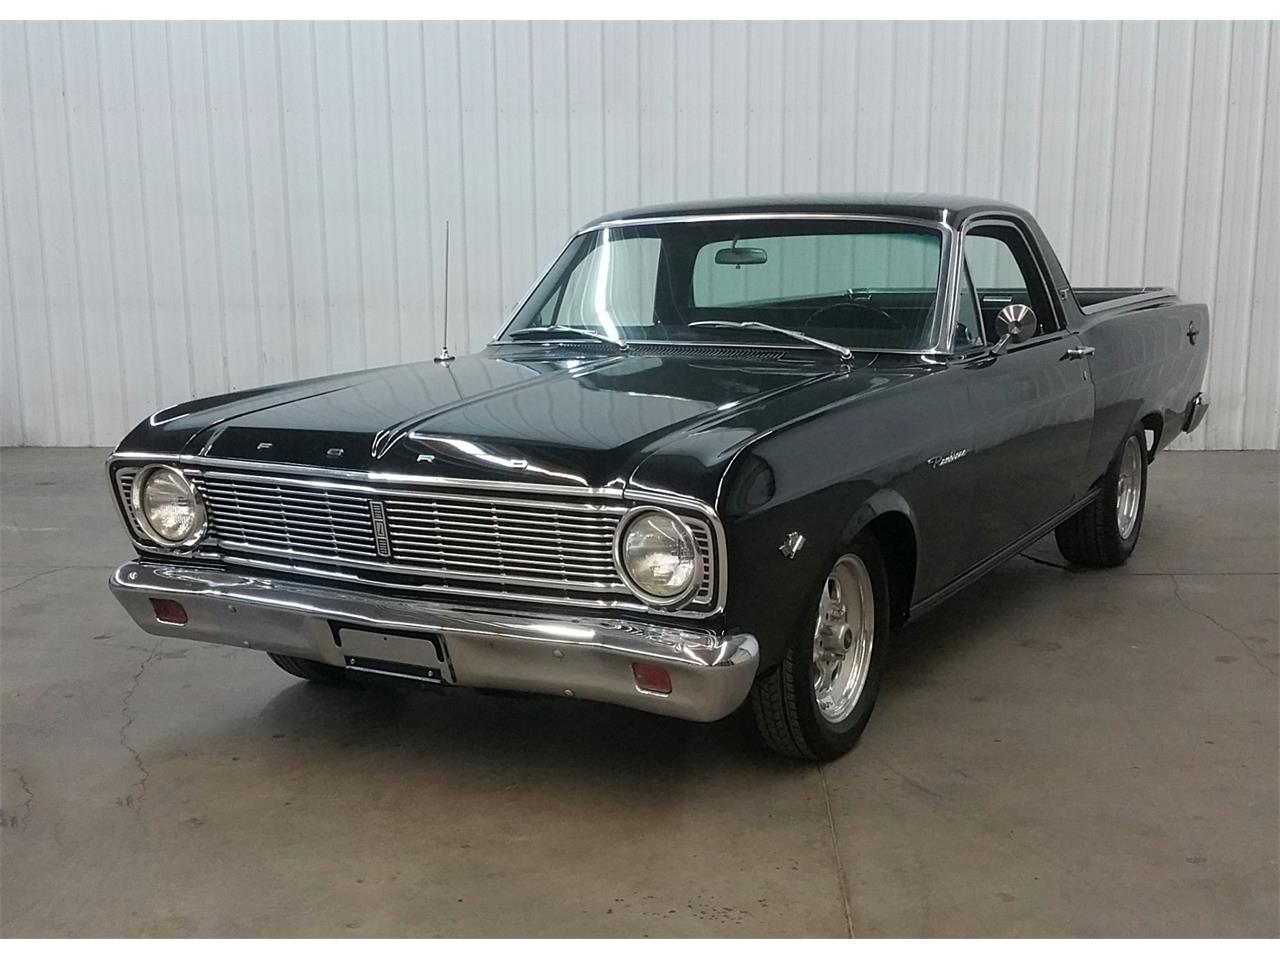 1966 ford ranchero for sale classiccars com cc 1062935 1966 ford ranchero for sale